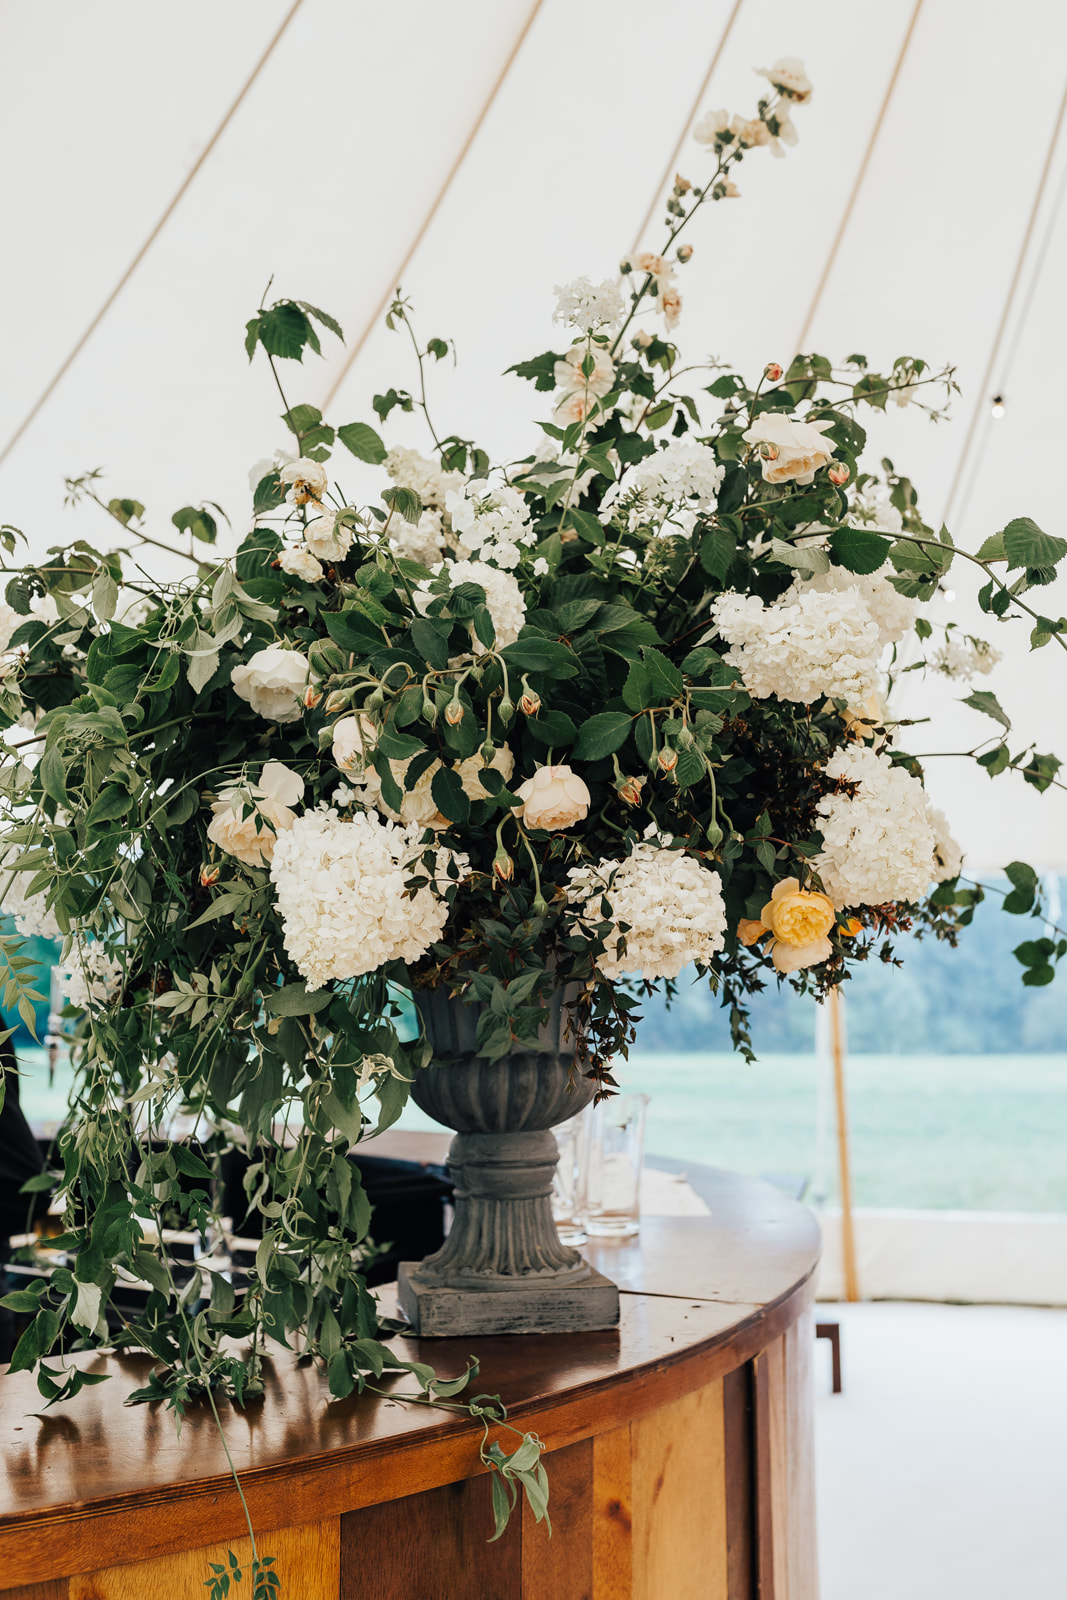 Lora & Daves Garden Sperry Tent Wedding florals: Images by Rebecca Carpenter Photography